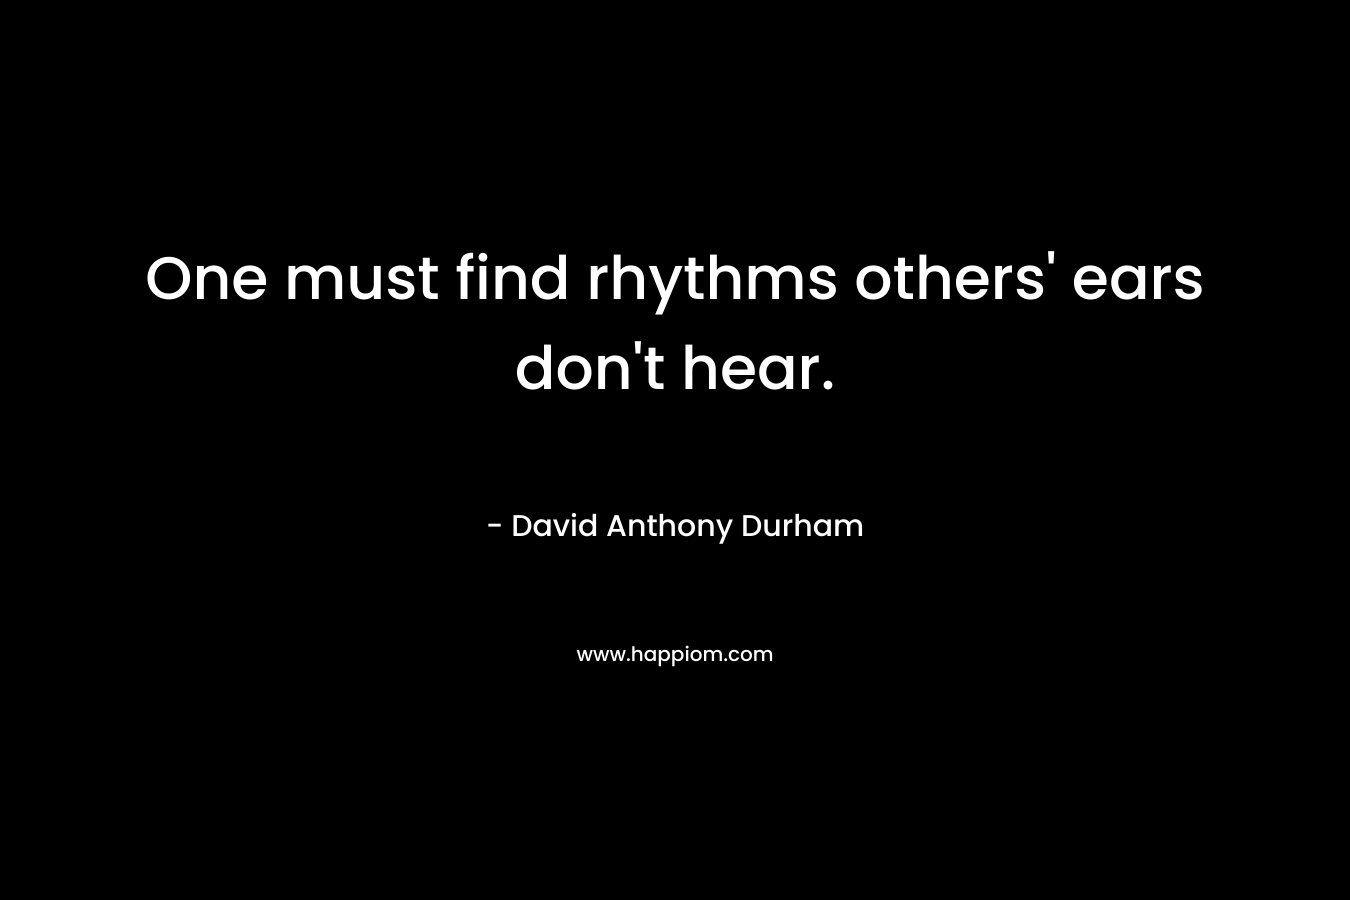 One must find rhythms others' ears don't hear.